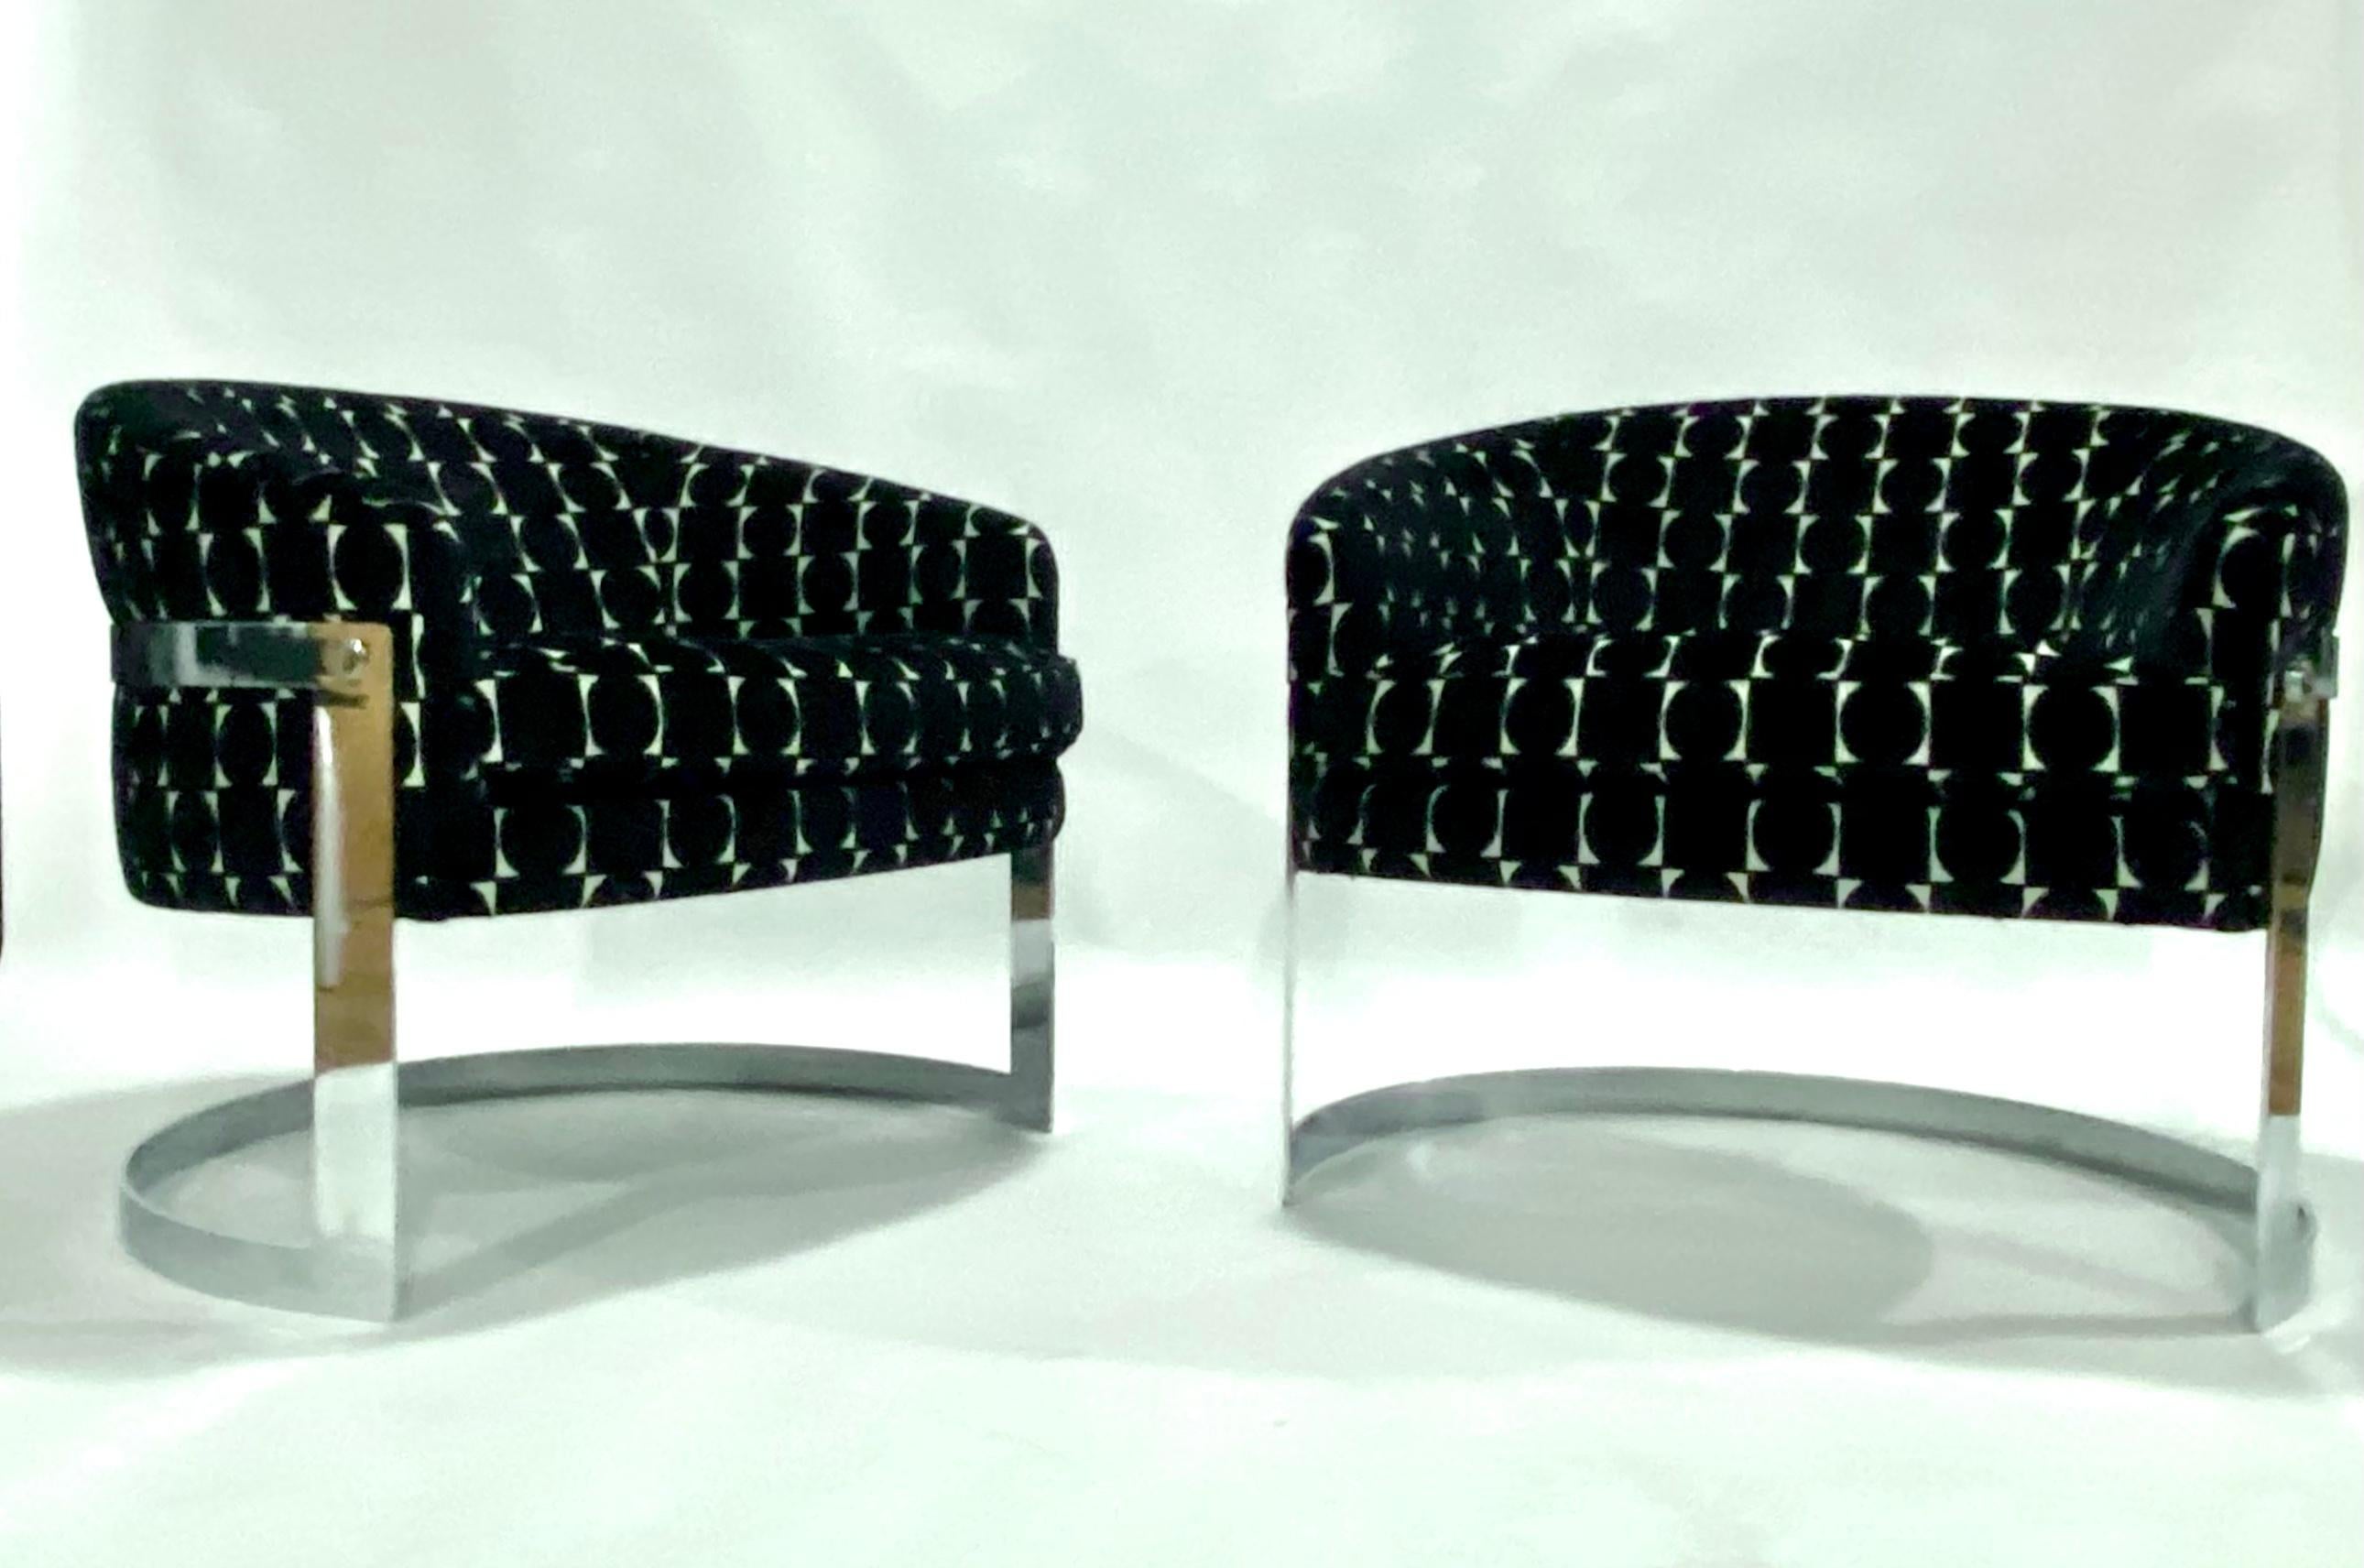 Flair Cantilevered barrel chairs on polished chrome steel frames newly upholstered in Gaston y Daniela geometric black and white fabric.